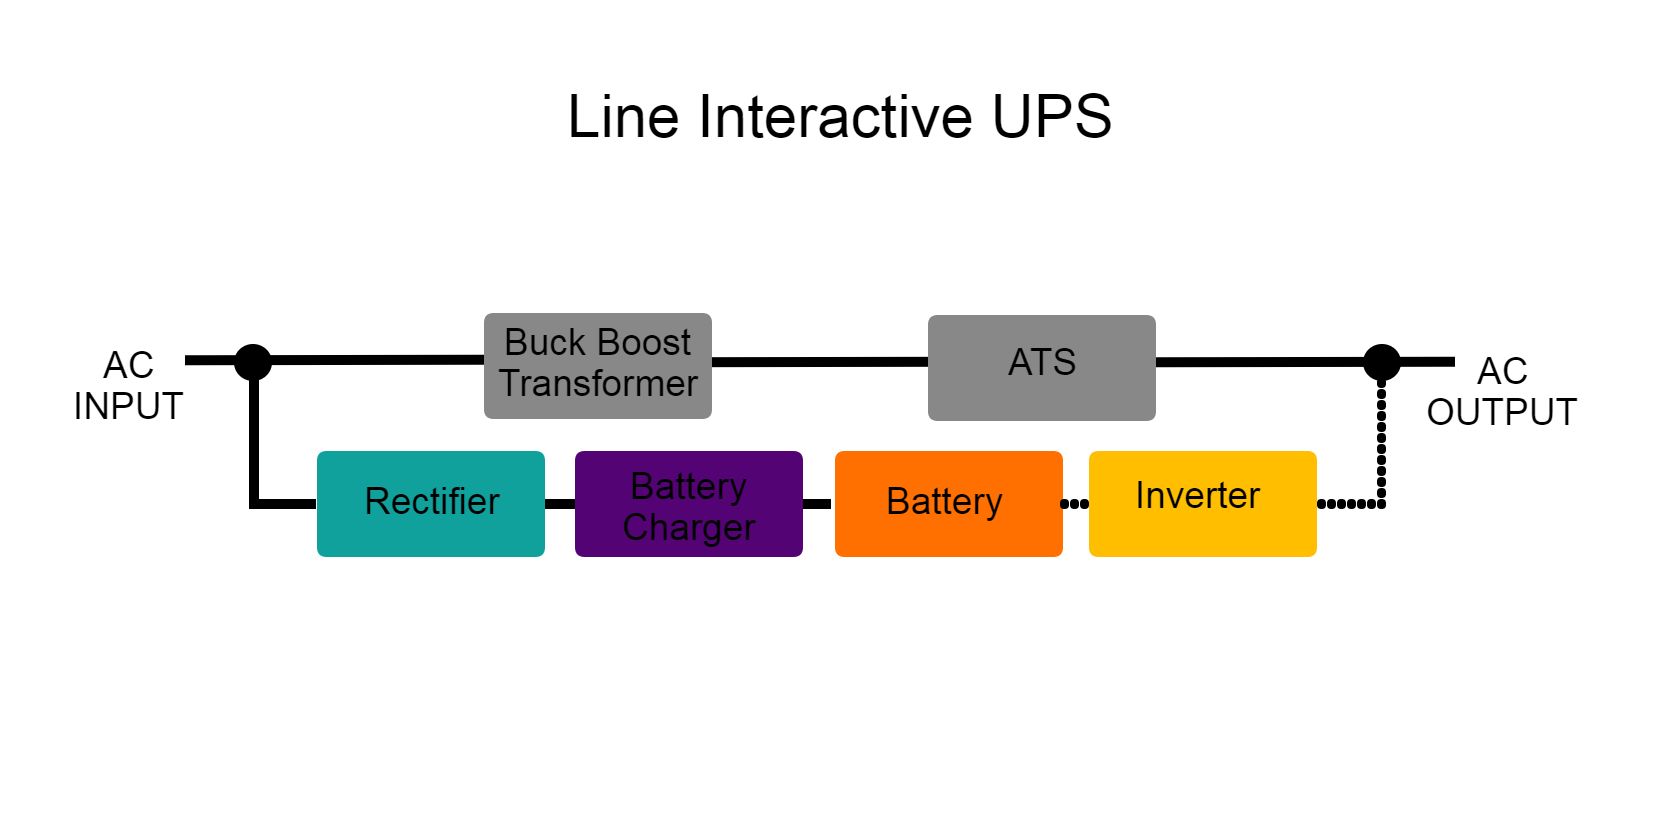 Illustration of line interactive UPS components